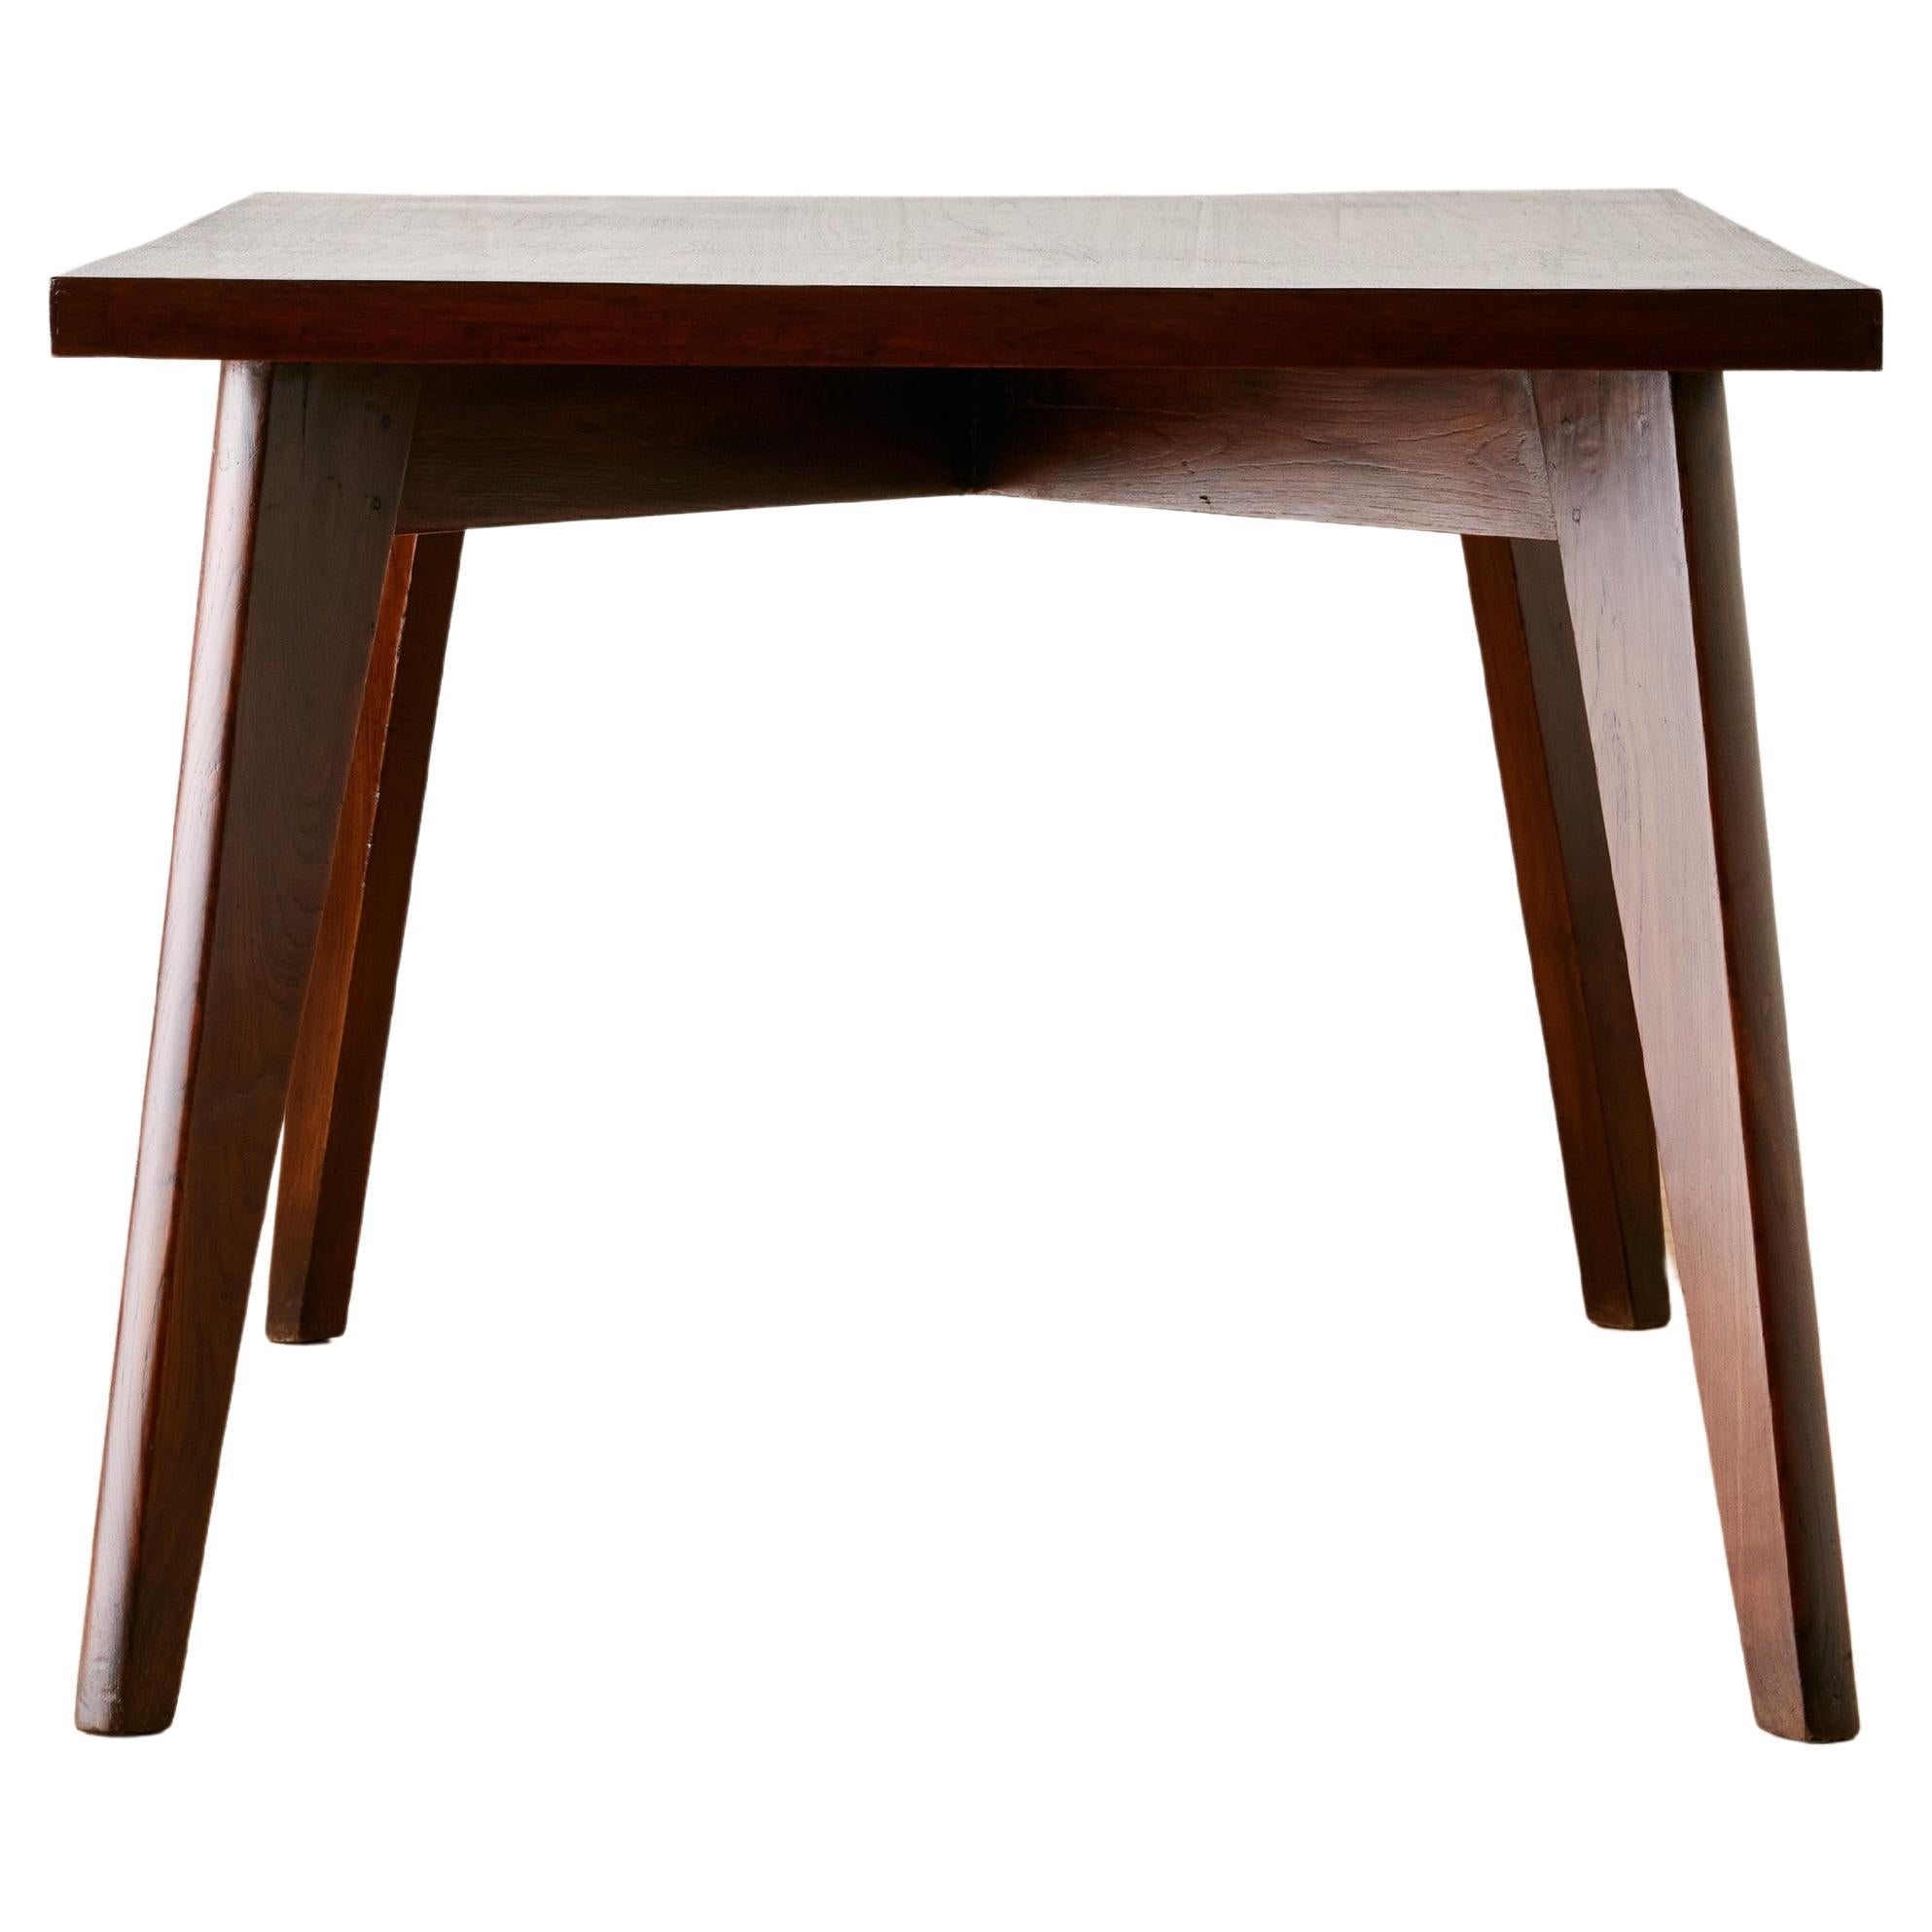 Dining Table by Pierre Jeanneret, circa 1961 (Model PJ-TA-01-A)